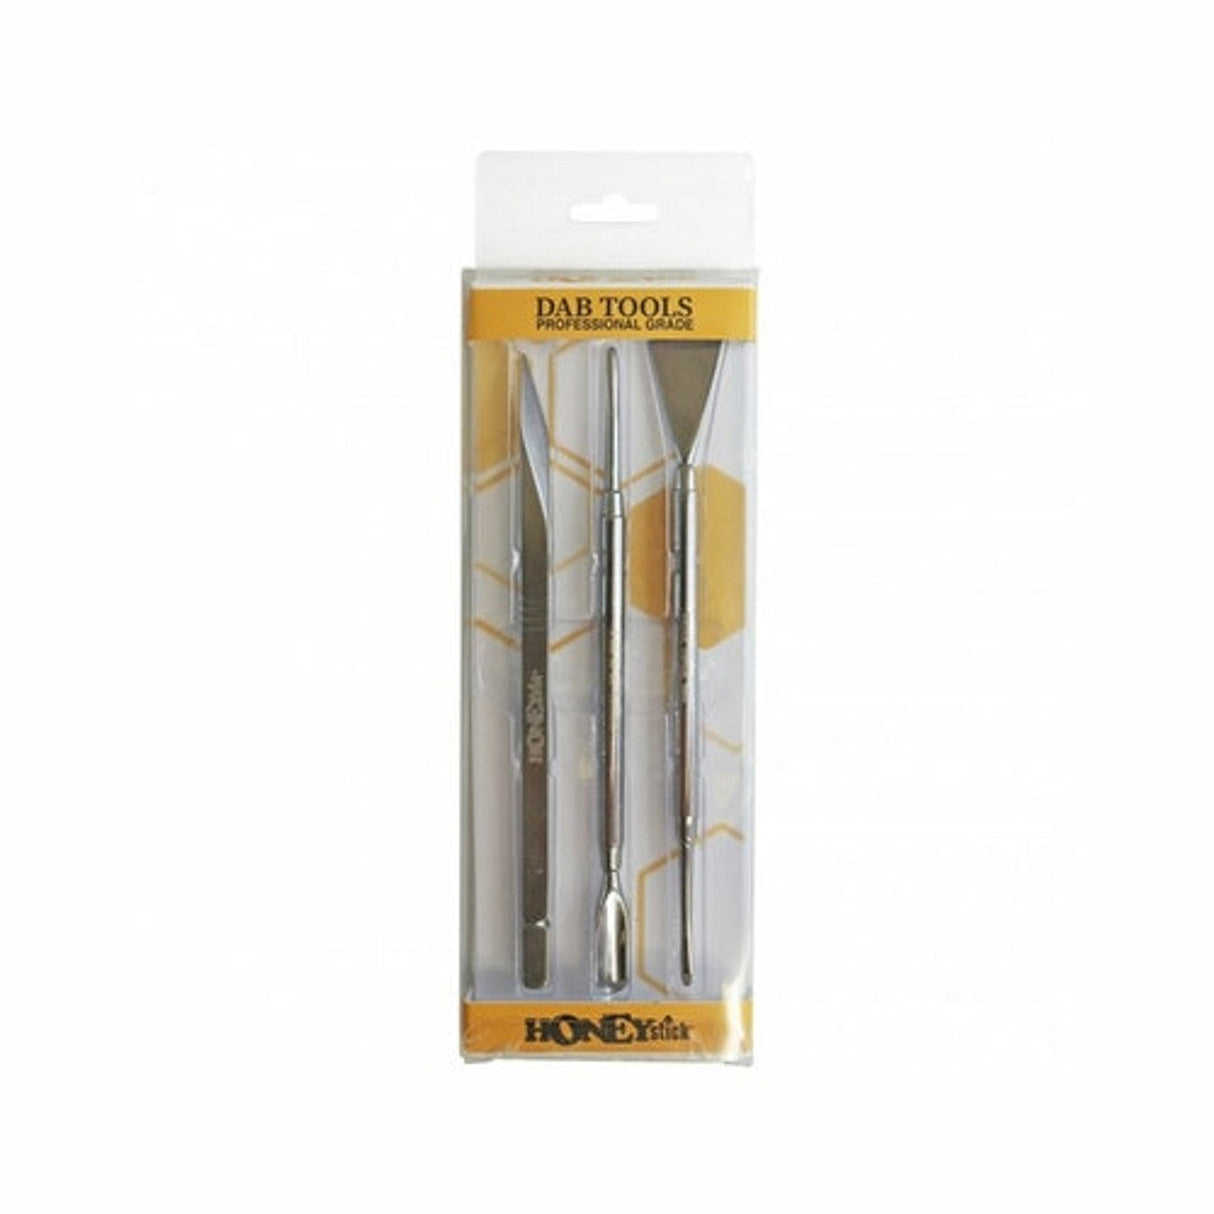 HoneyStick 3-piece Professional Dab Tool Set in packaging, front view, stainless steel